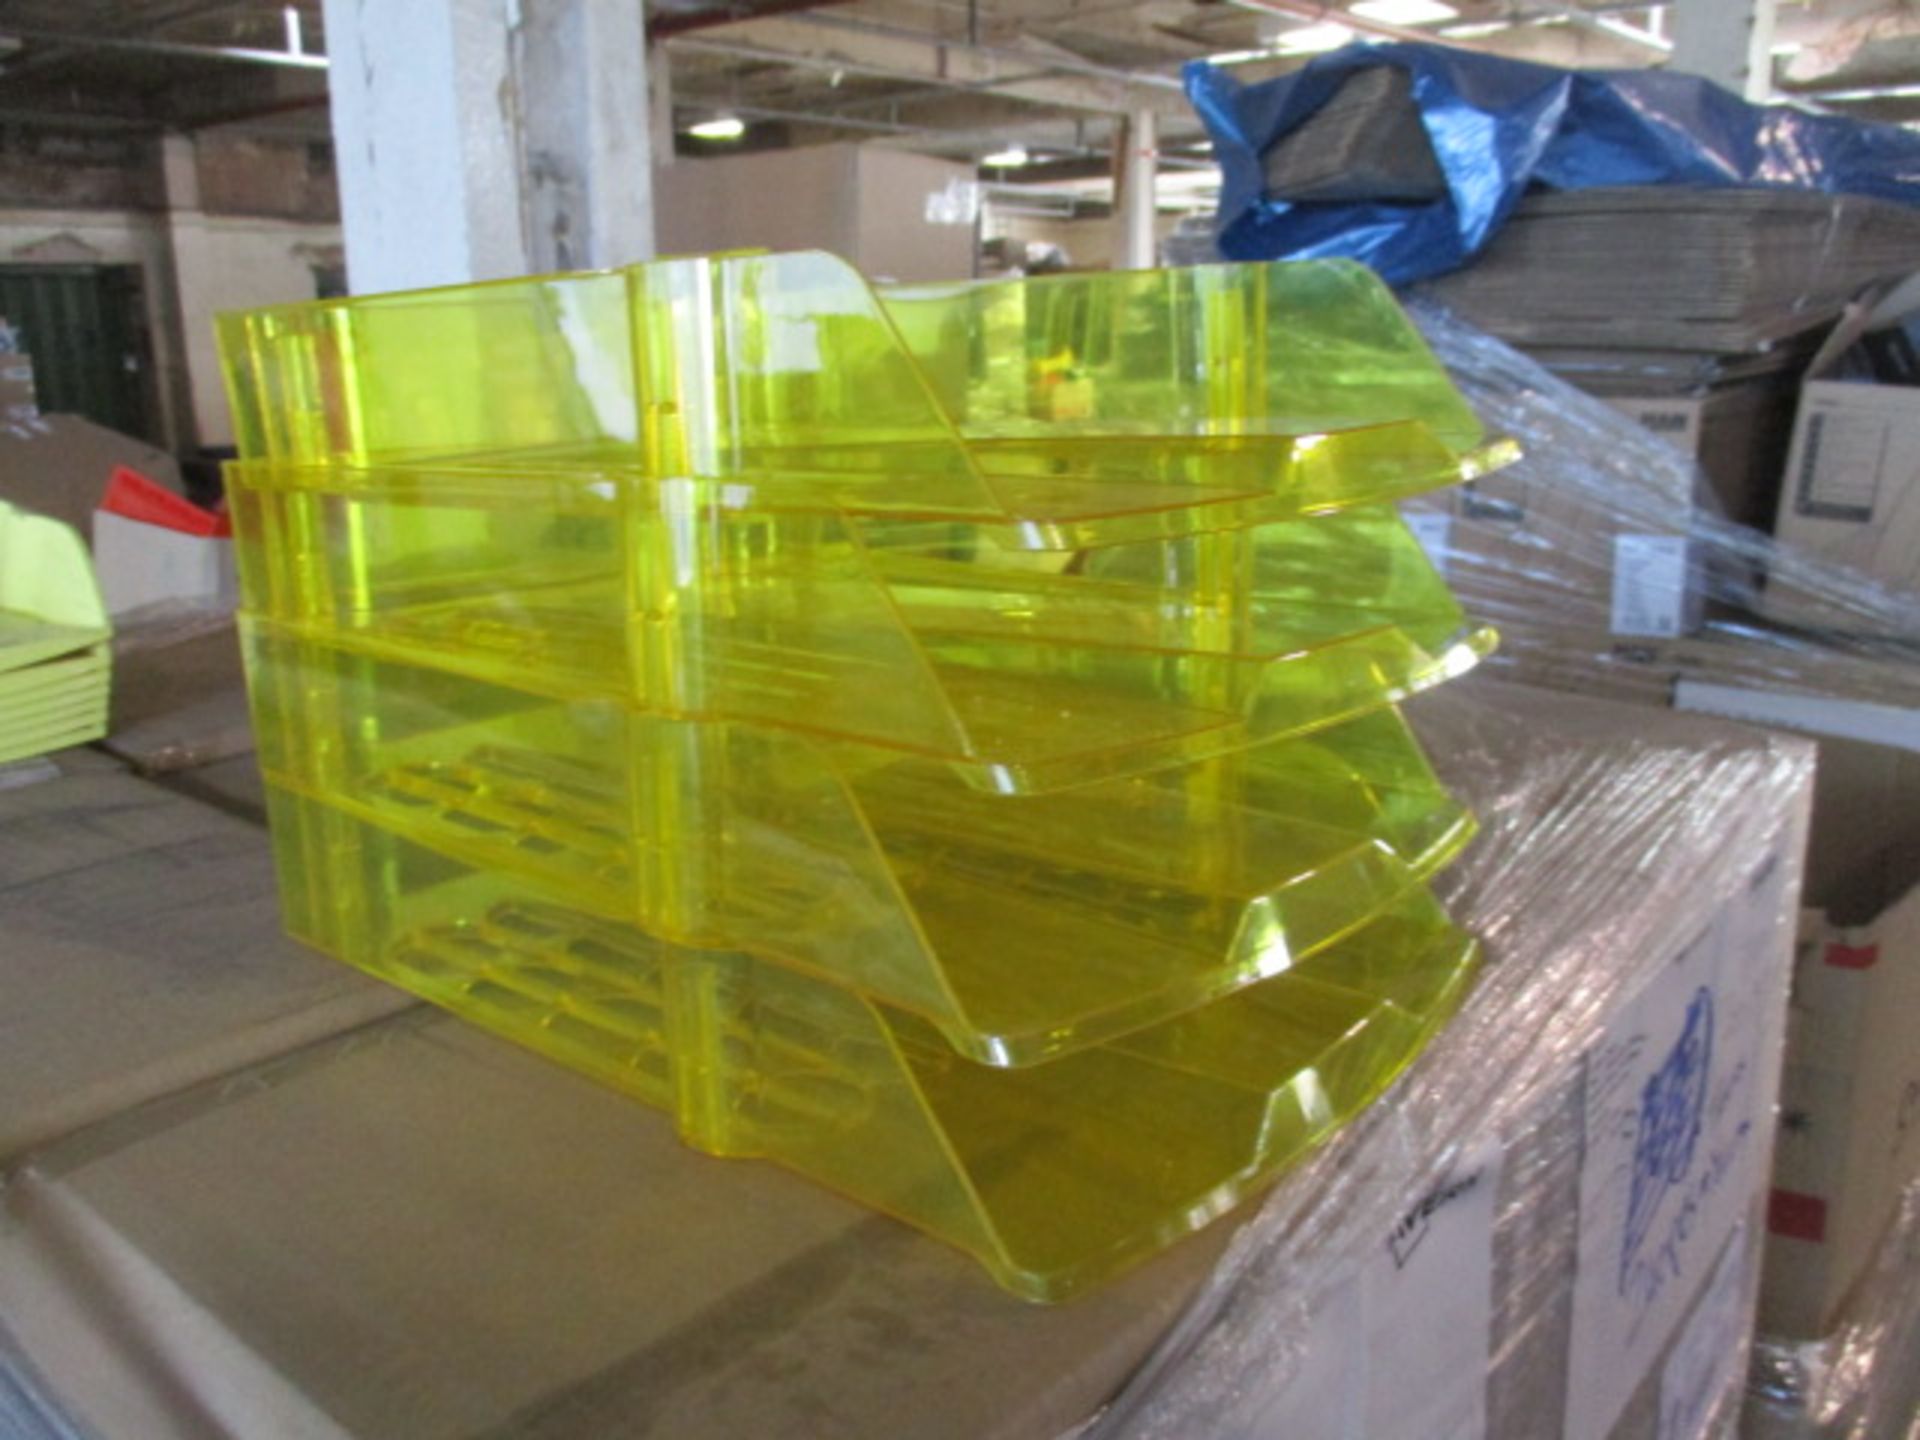 240pcs brand new factory sealed Transparent yellow Premium grade office desk stacking trays on 1 - Image 2 of 4